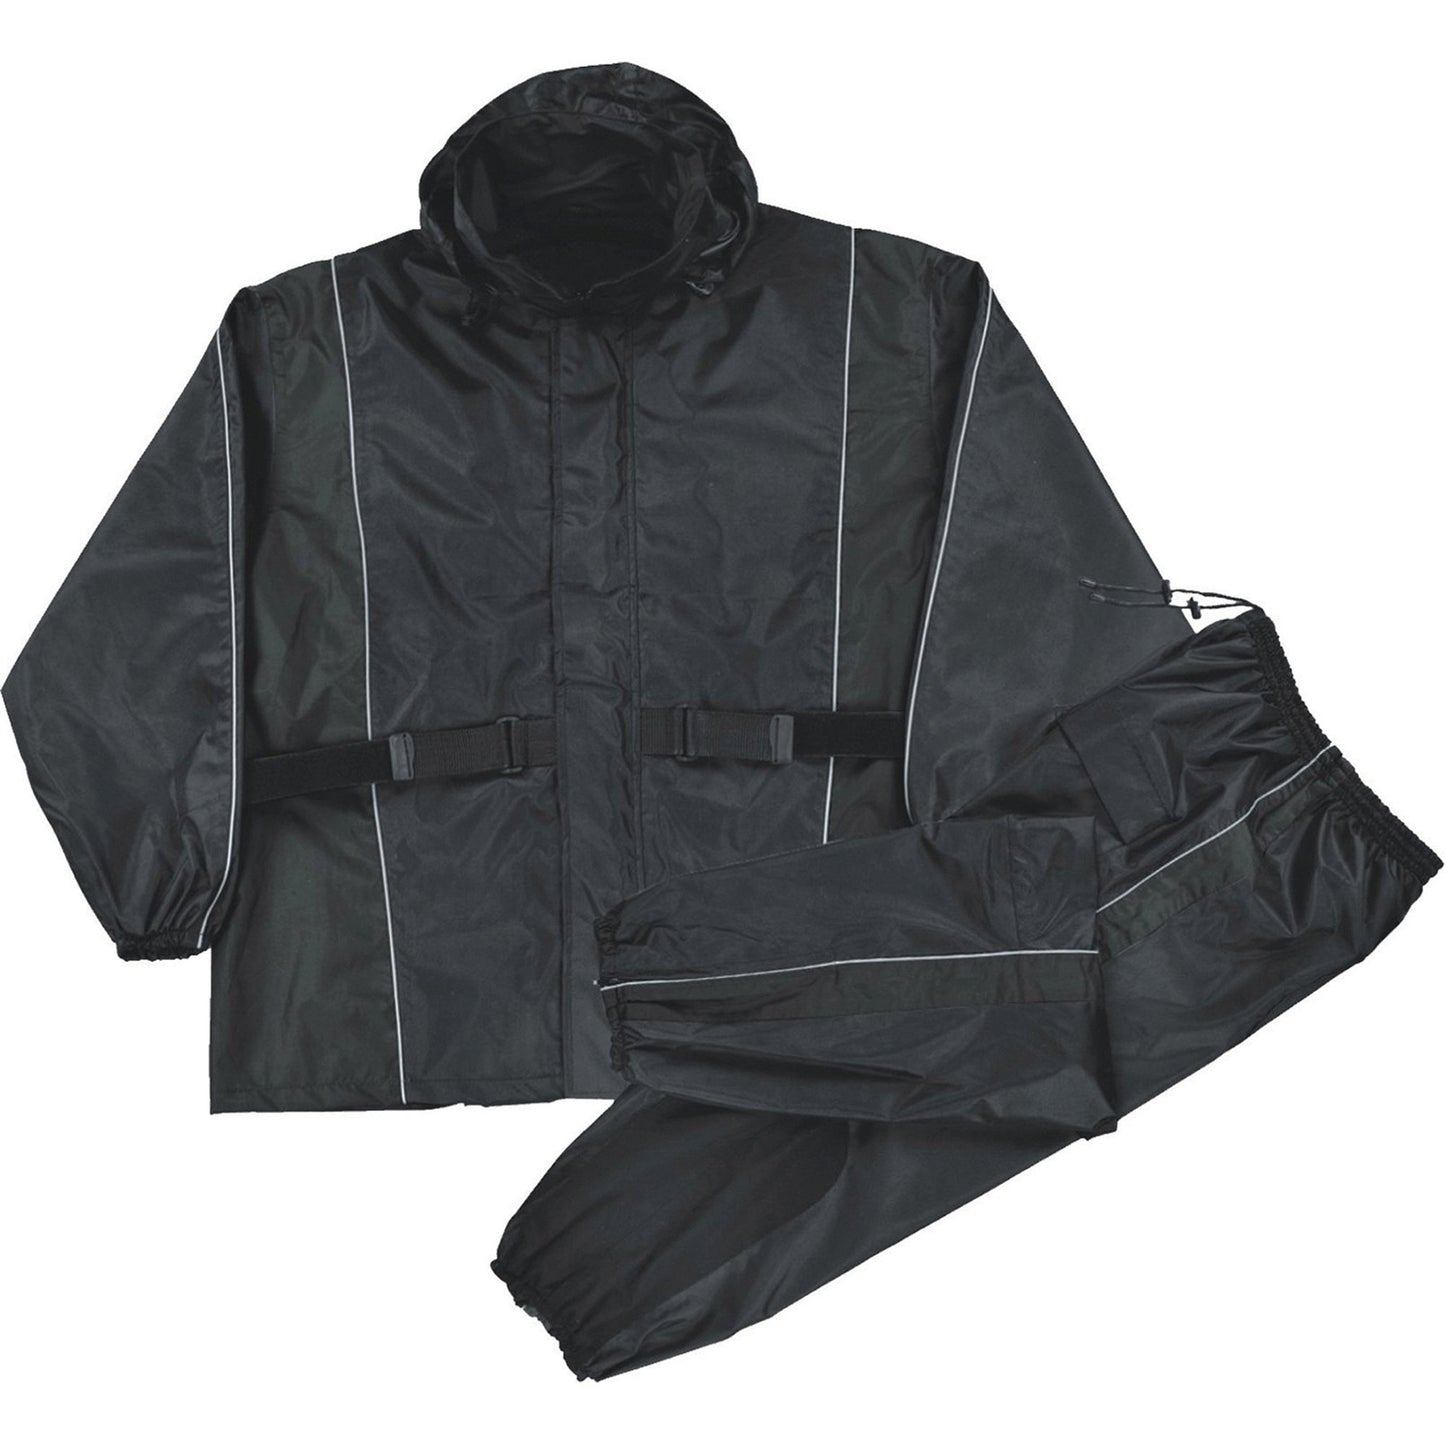 Milwaukee Leather SH2225L Women's Black Water Resistant Rain Suit with Reflective Piping